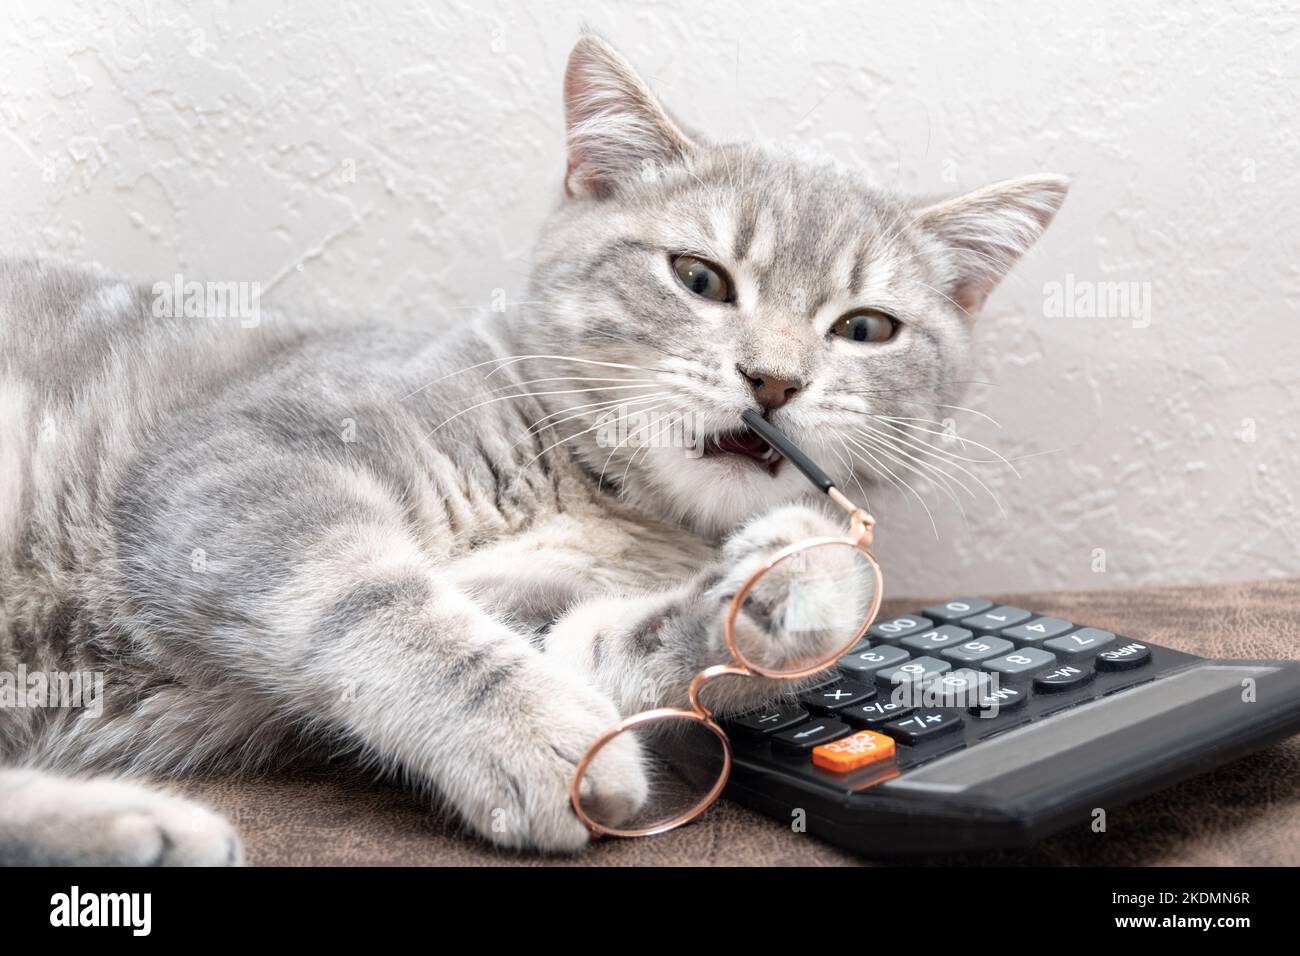 funny cat picture computer